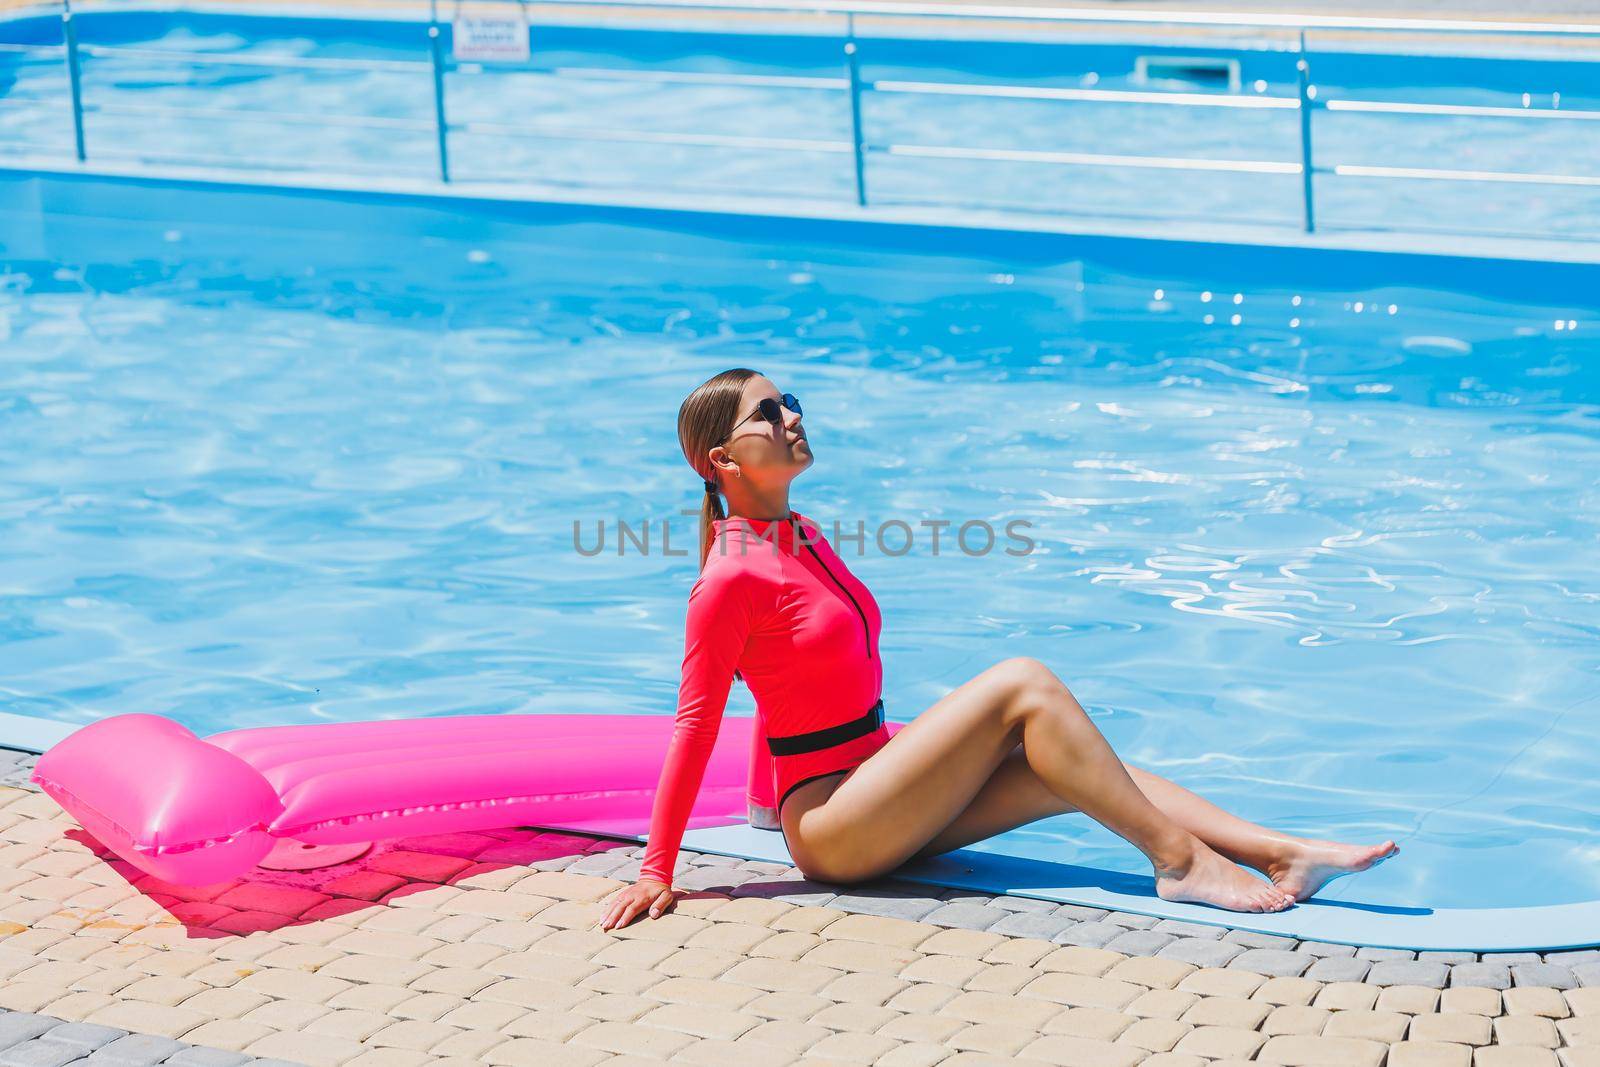 Pretty woman in a bright pink swimsuit near the pool on vacation, she is wearing sunglasses. The concept of summer holidays in the hotel by the pool. Inflatable pink mattress on the background